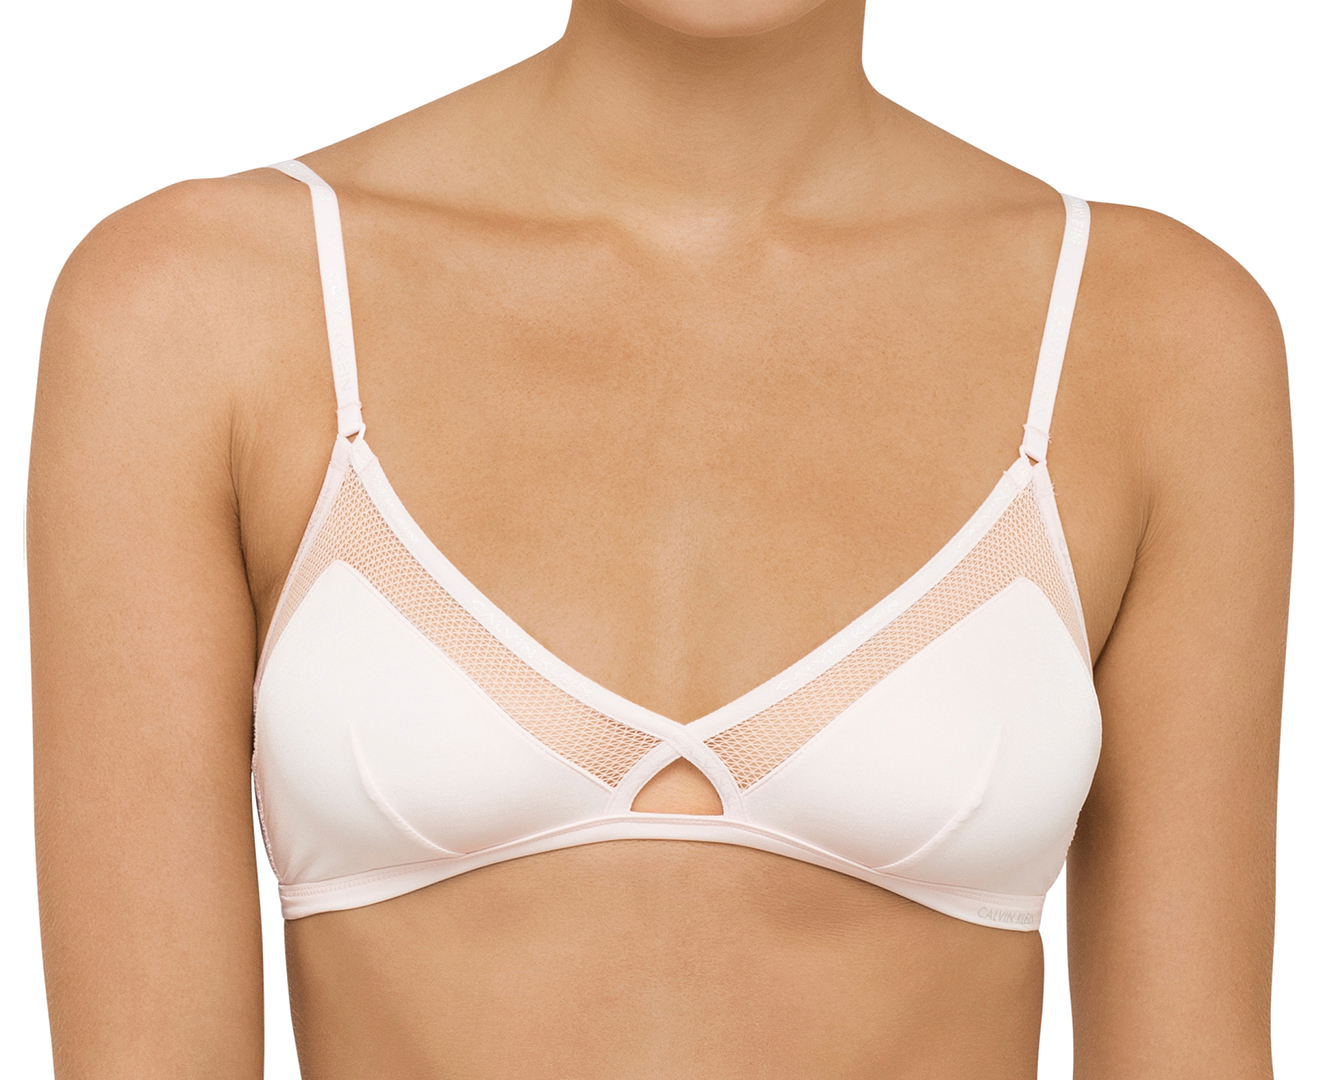 Calvin Klein Women's Youth Unlined Triangle Bralette - Nymph's Thigh